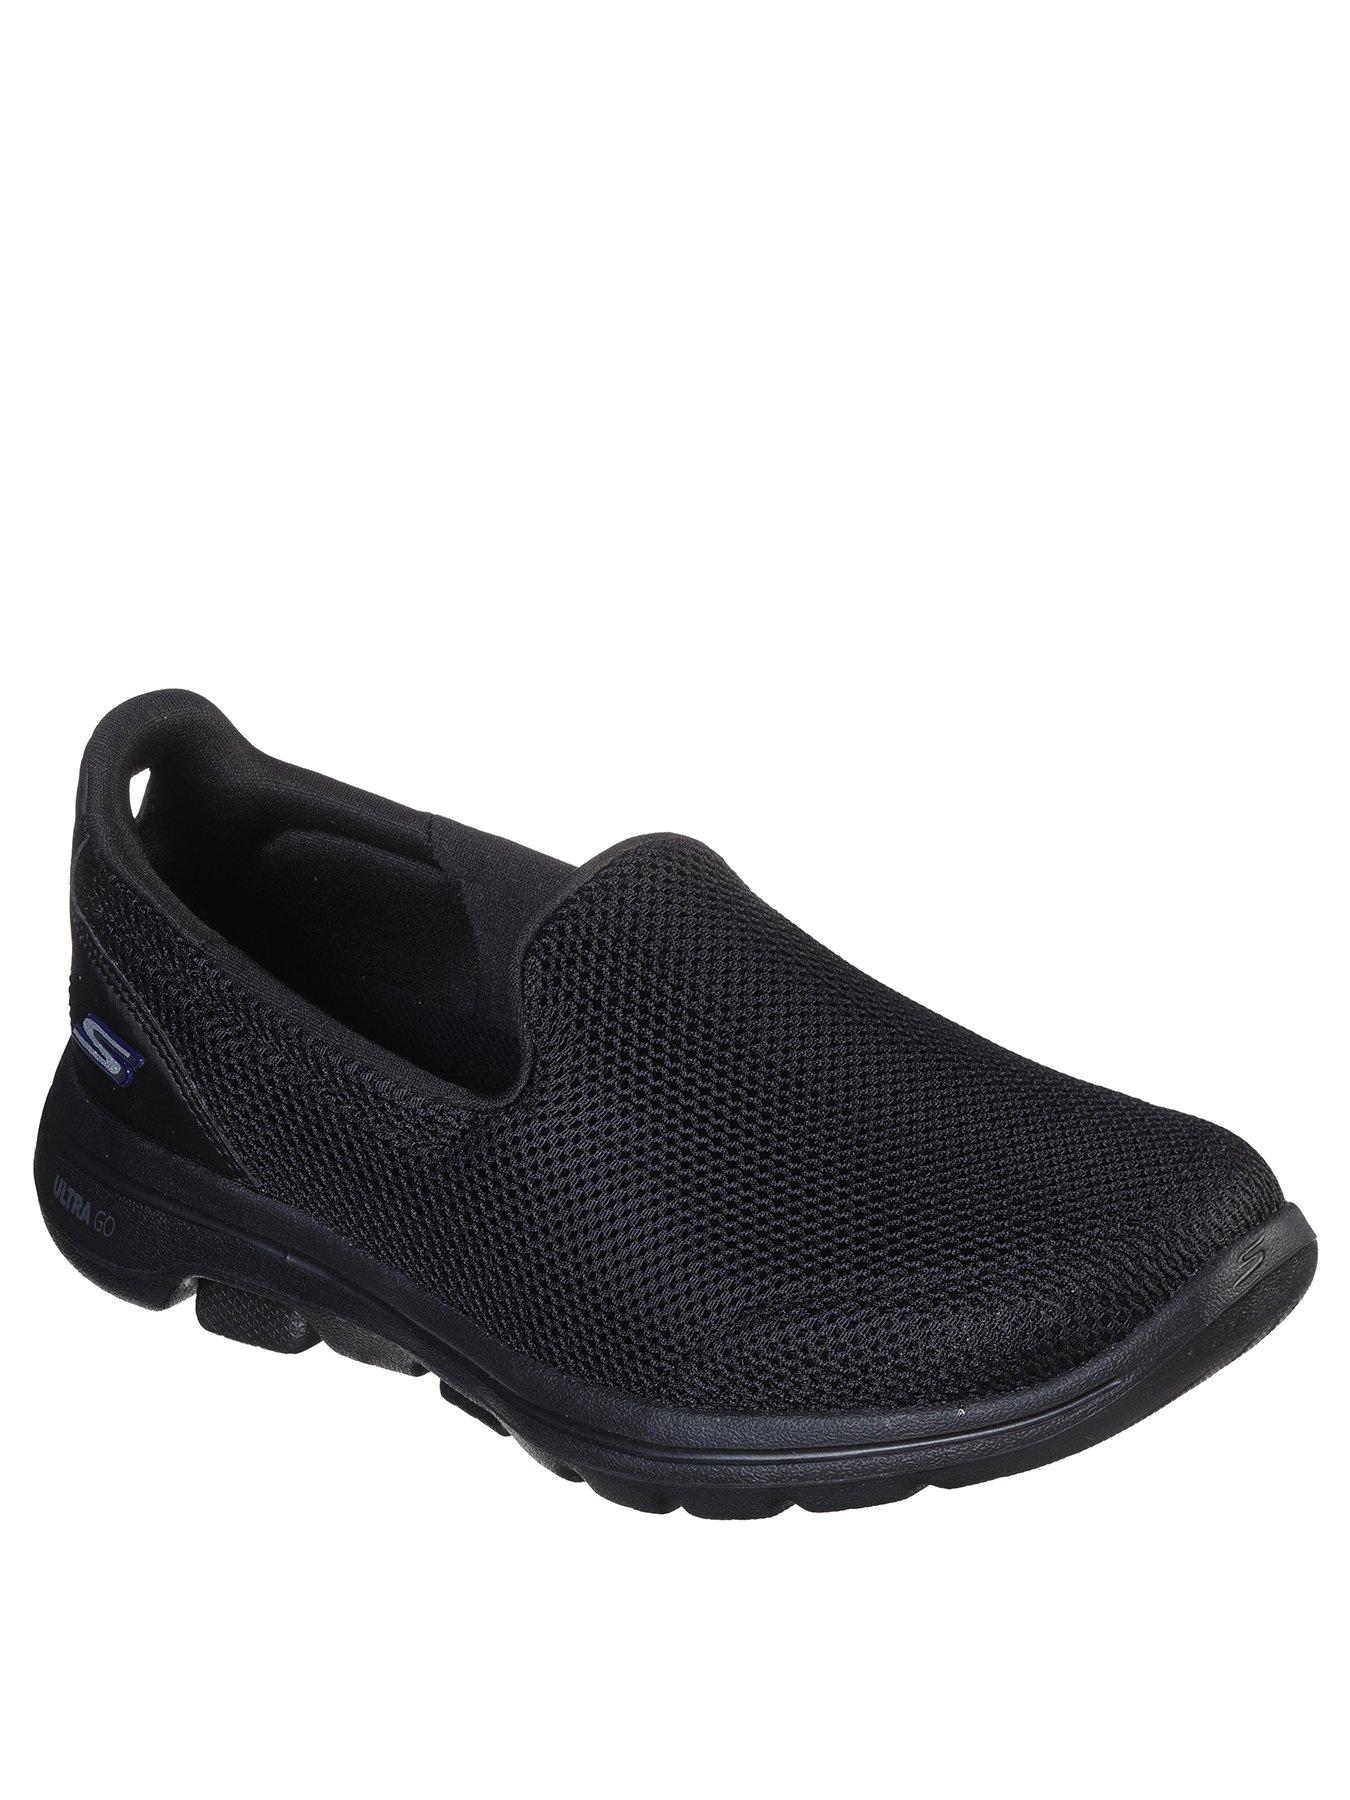 skechers pull on shoes